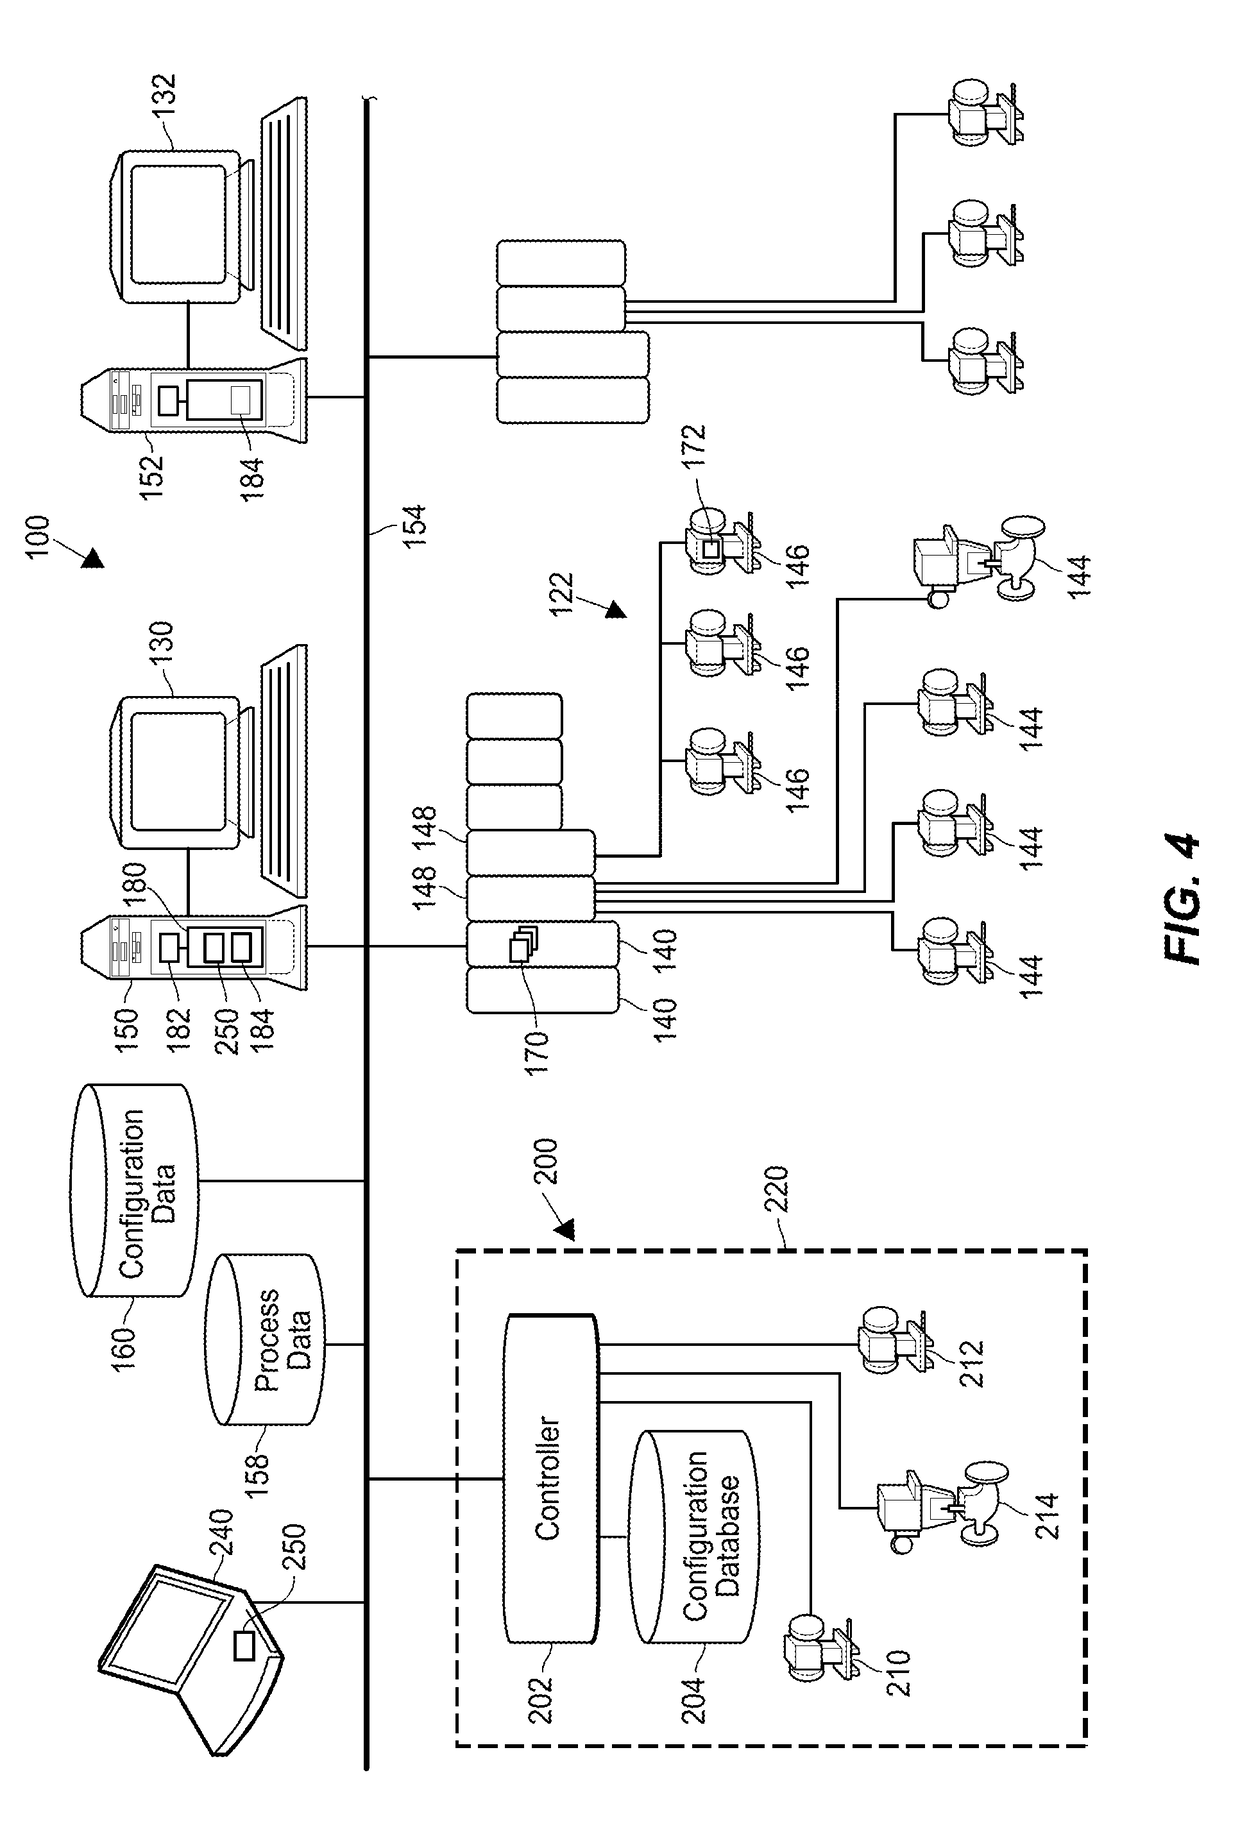 Assistant Application for a Modular Control System